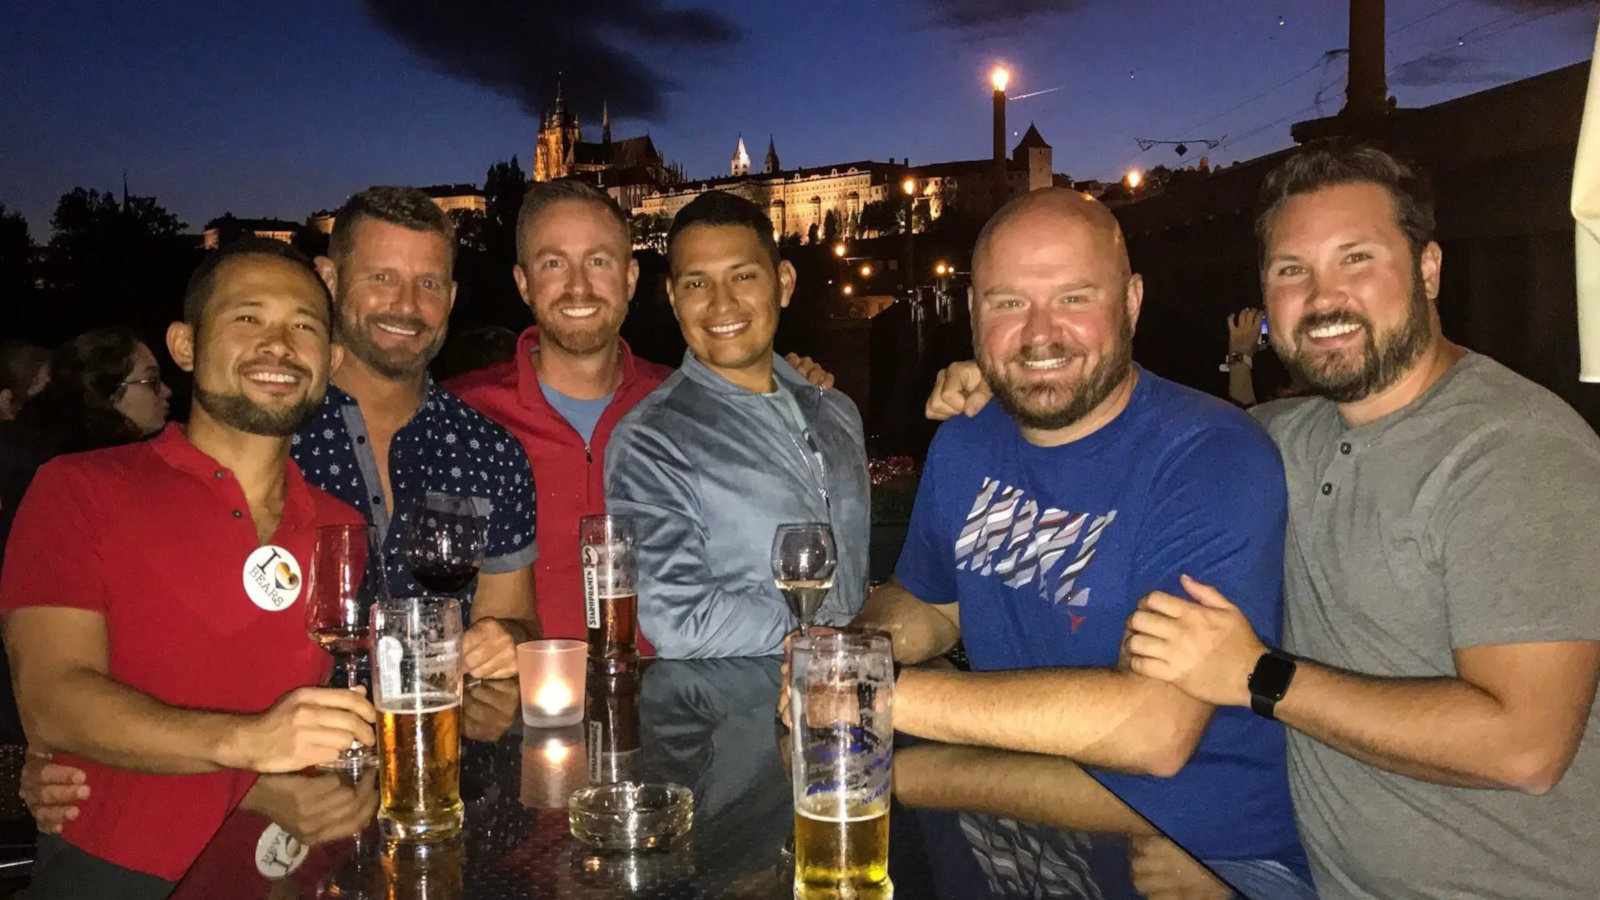 You'll make plenty of new friends while enjoying the sights on Brandg's Prague and Danube River gay cruise